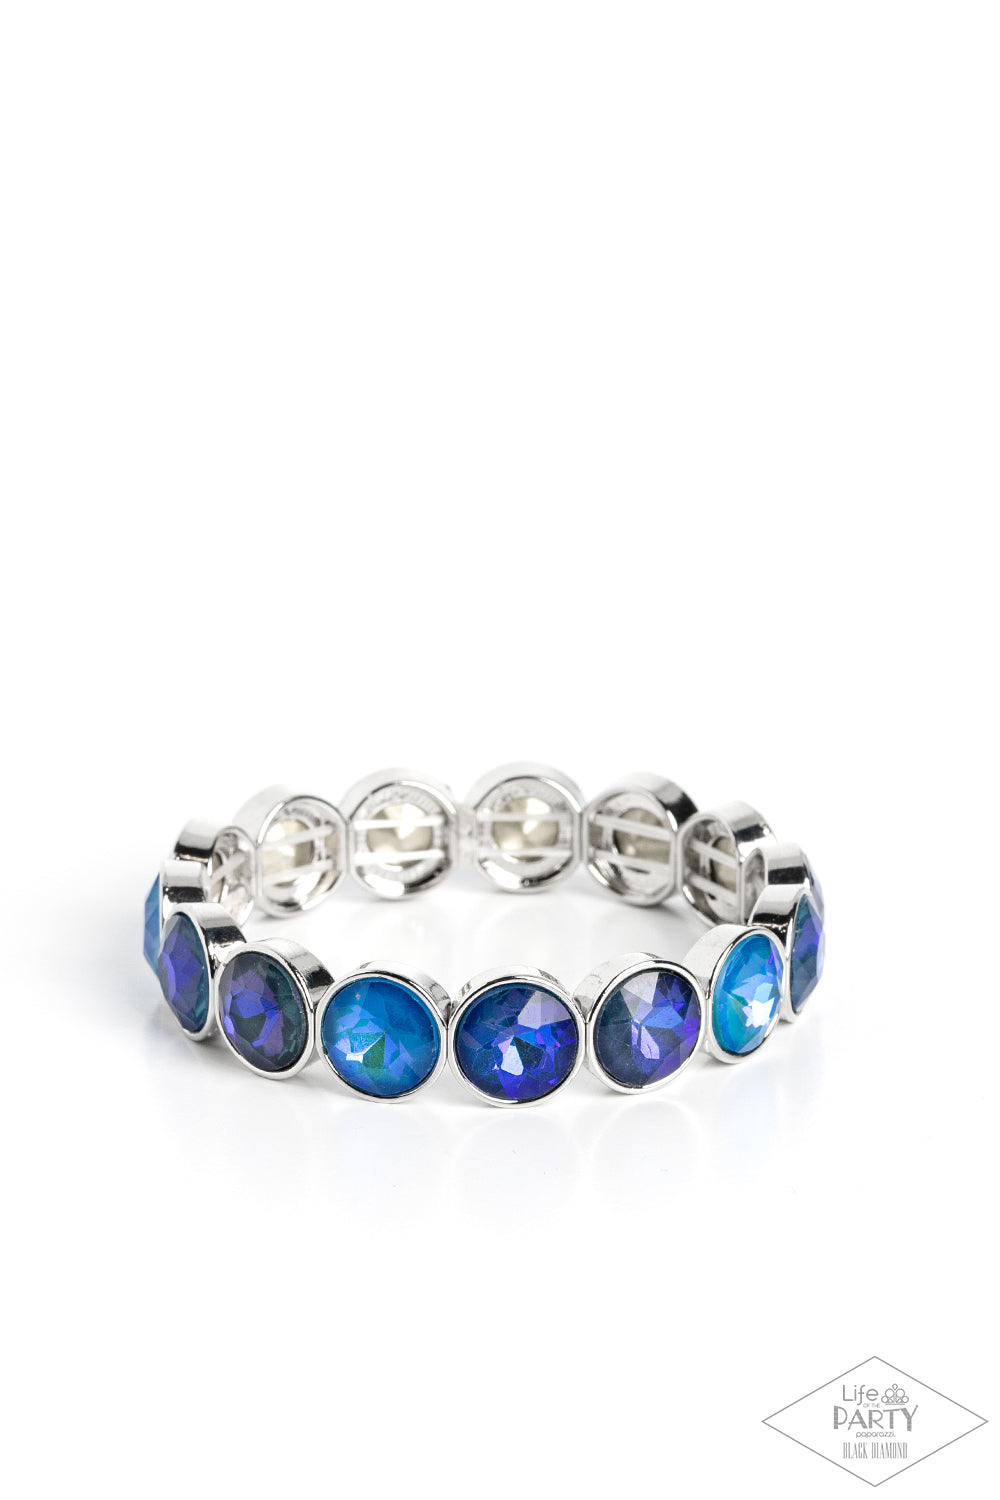 Paparazzi Accessories Radiant on Repeat - Blue Encased in sleek silver fittings, a sparkly series of opalescent blue rhinestones are threaded along stretchy bands around the wrist for a radiant finish. Sold as one individual bracelet. Jewelry